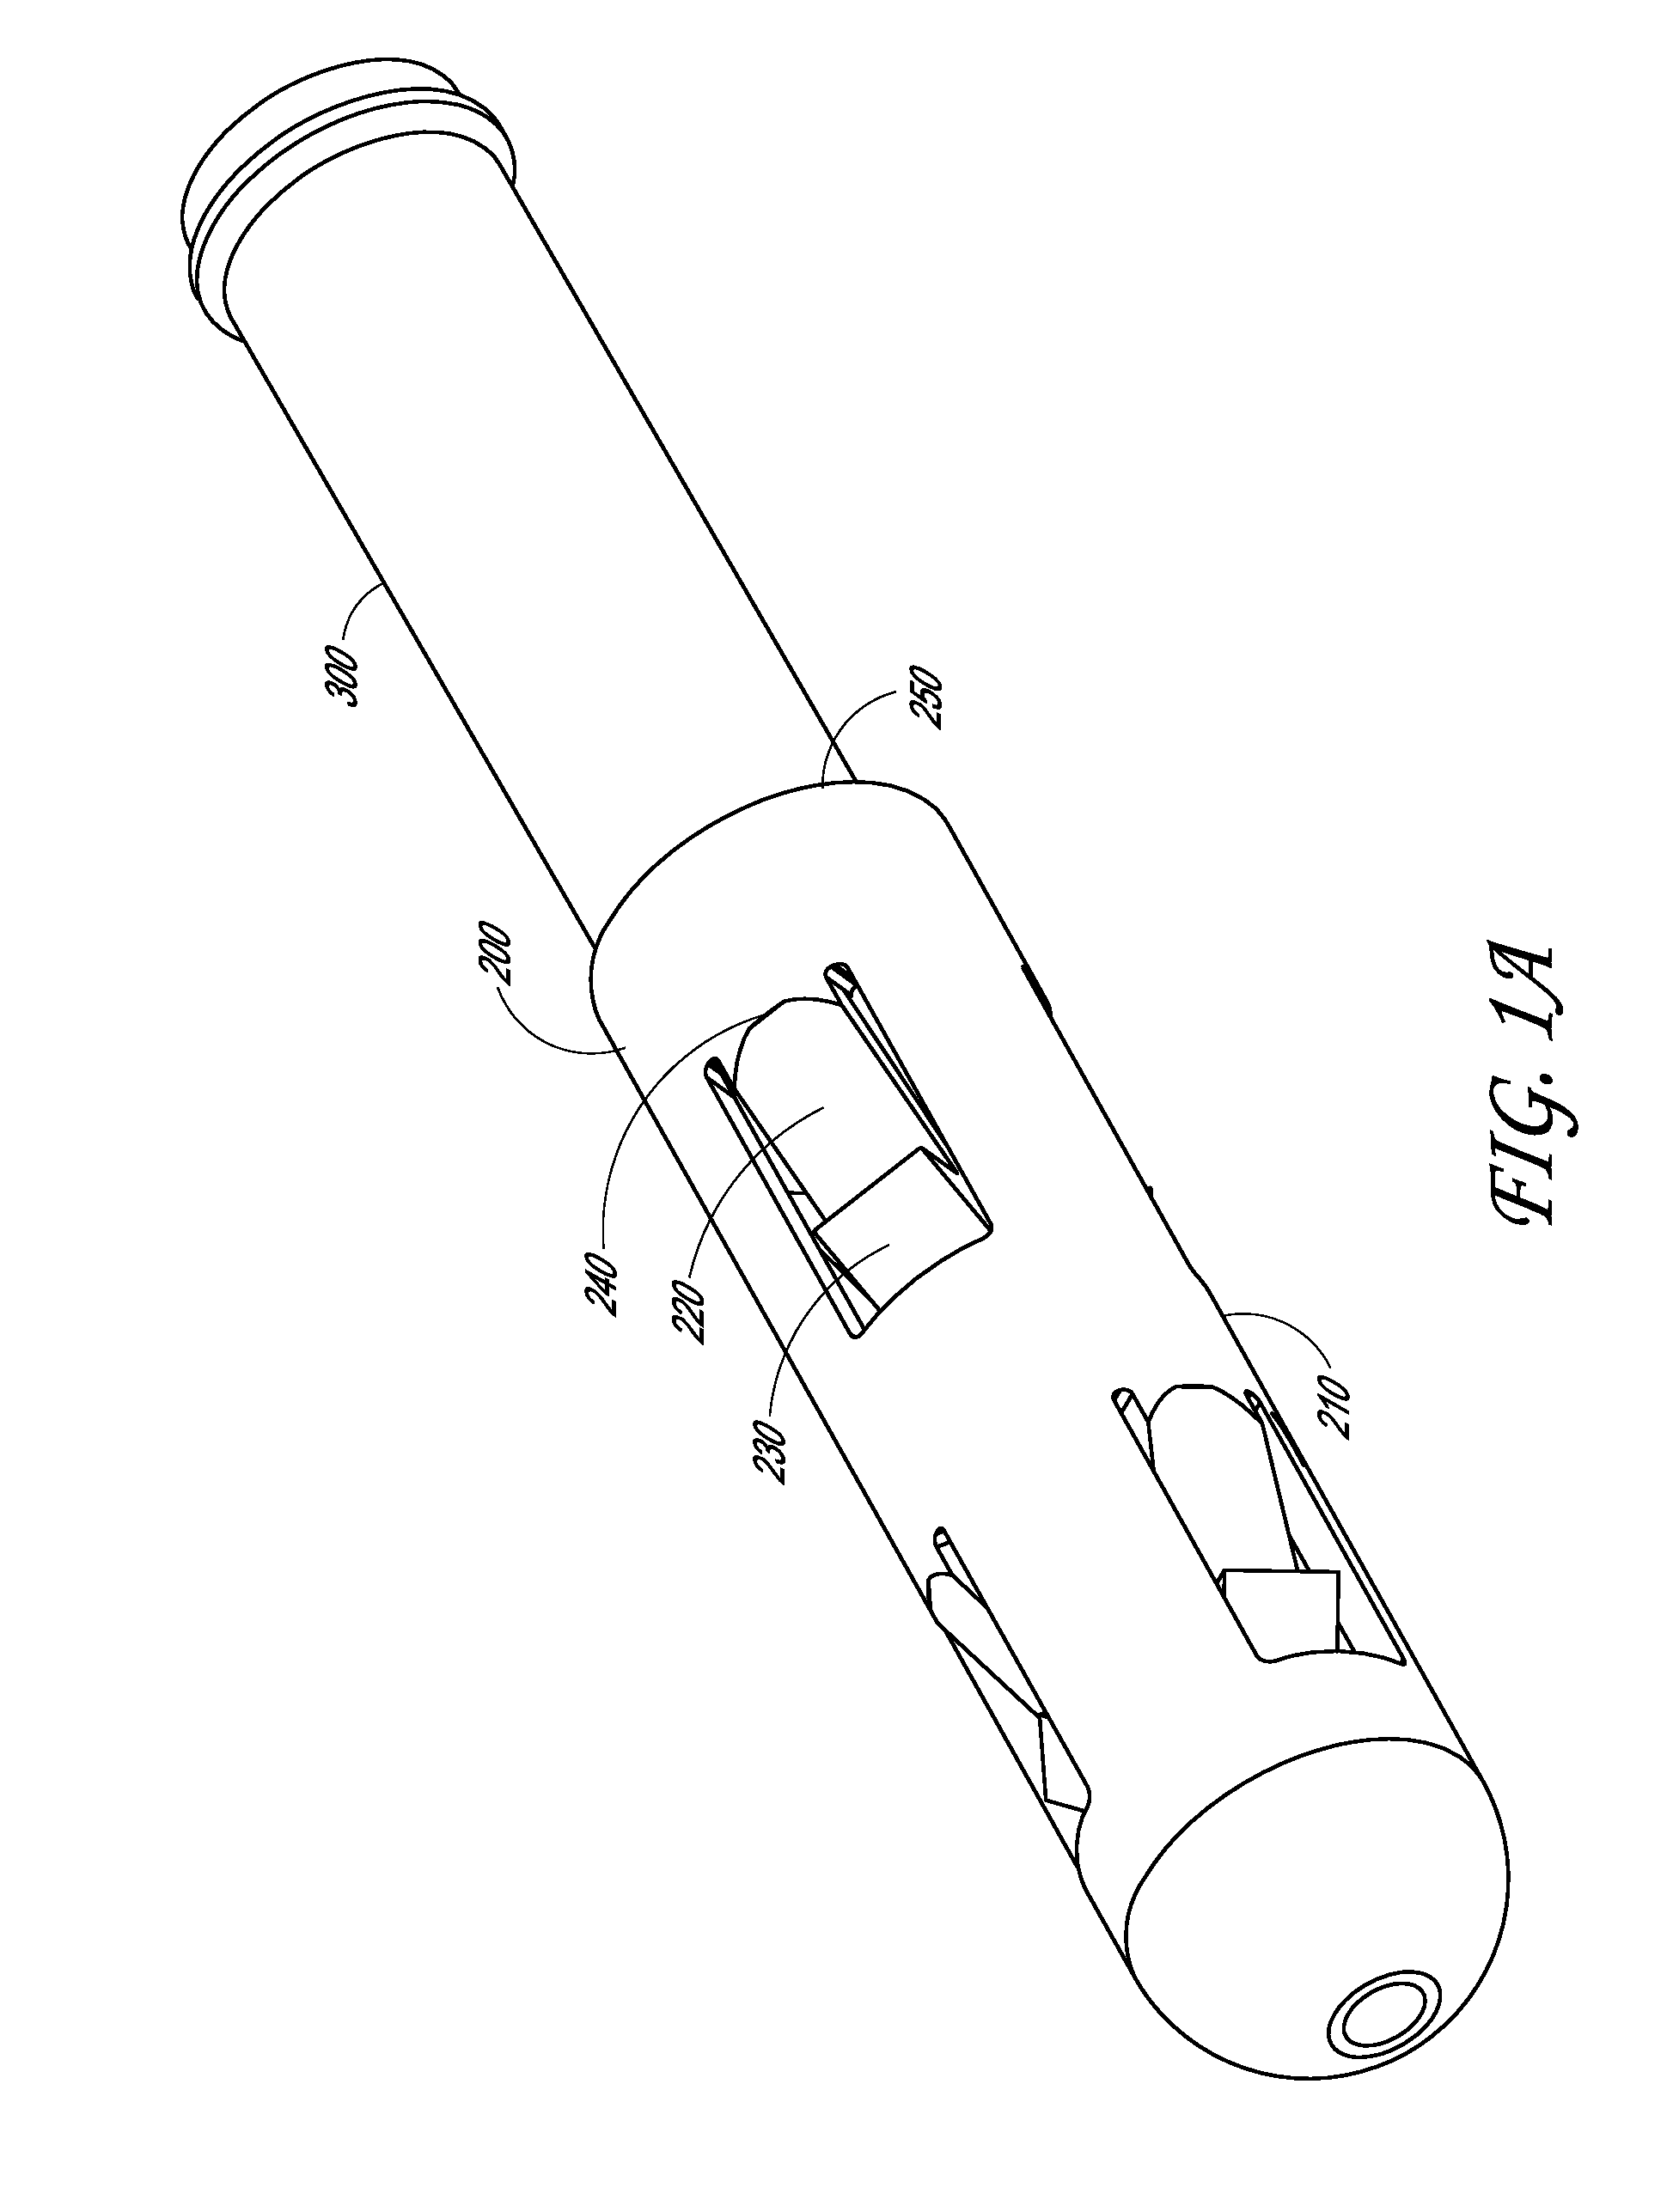 System and method for securing tissue to bone